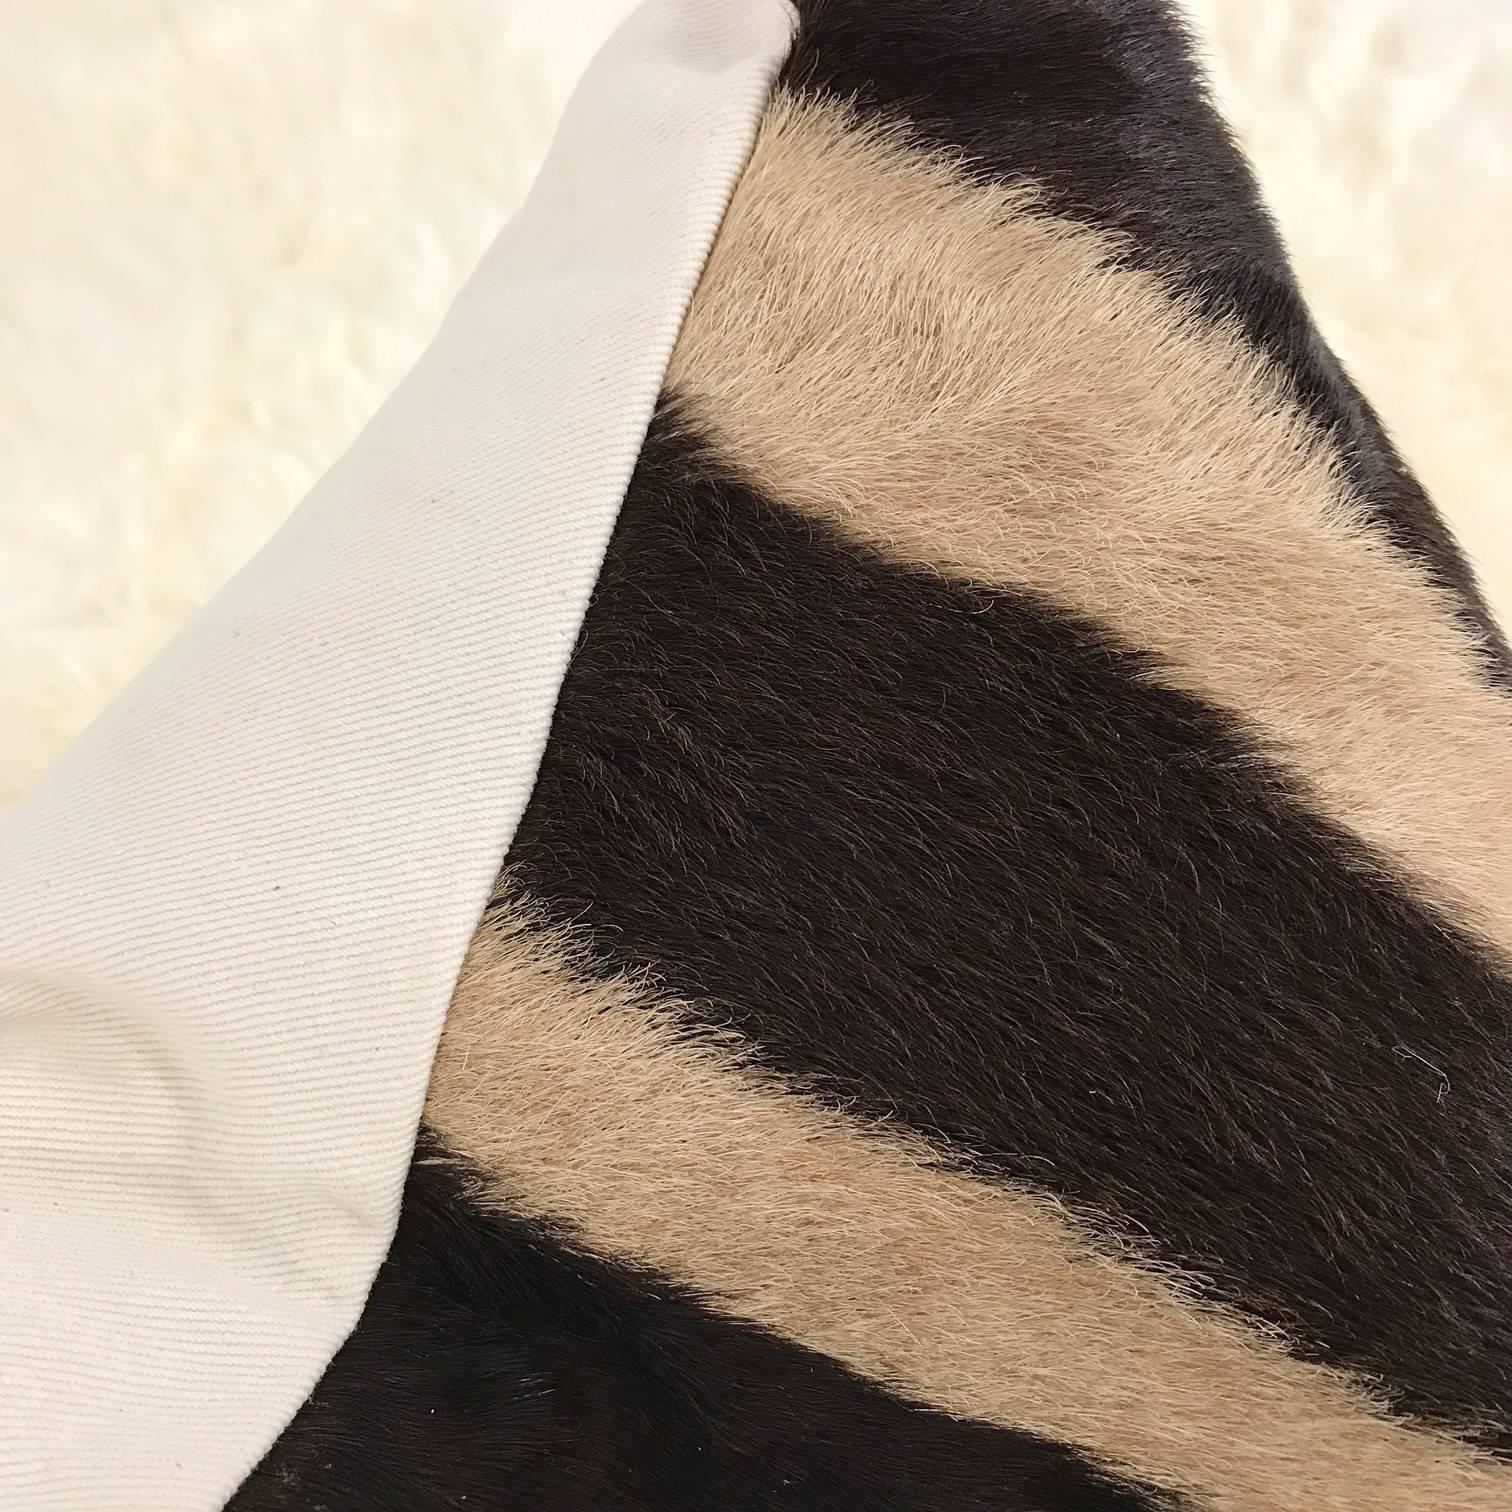 Forsyth zebra hide pillows are simply the best. The most beautiful hides are selected, hand cut, hand-stitched and hand stuffed with the finest goose down. Each step is meticulously curated by Saint Louis based Forsyth artisans. Every pillow is a